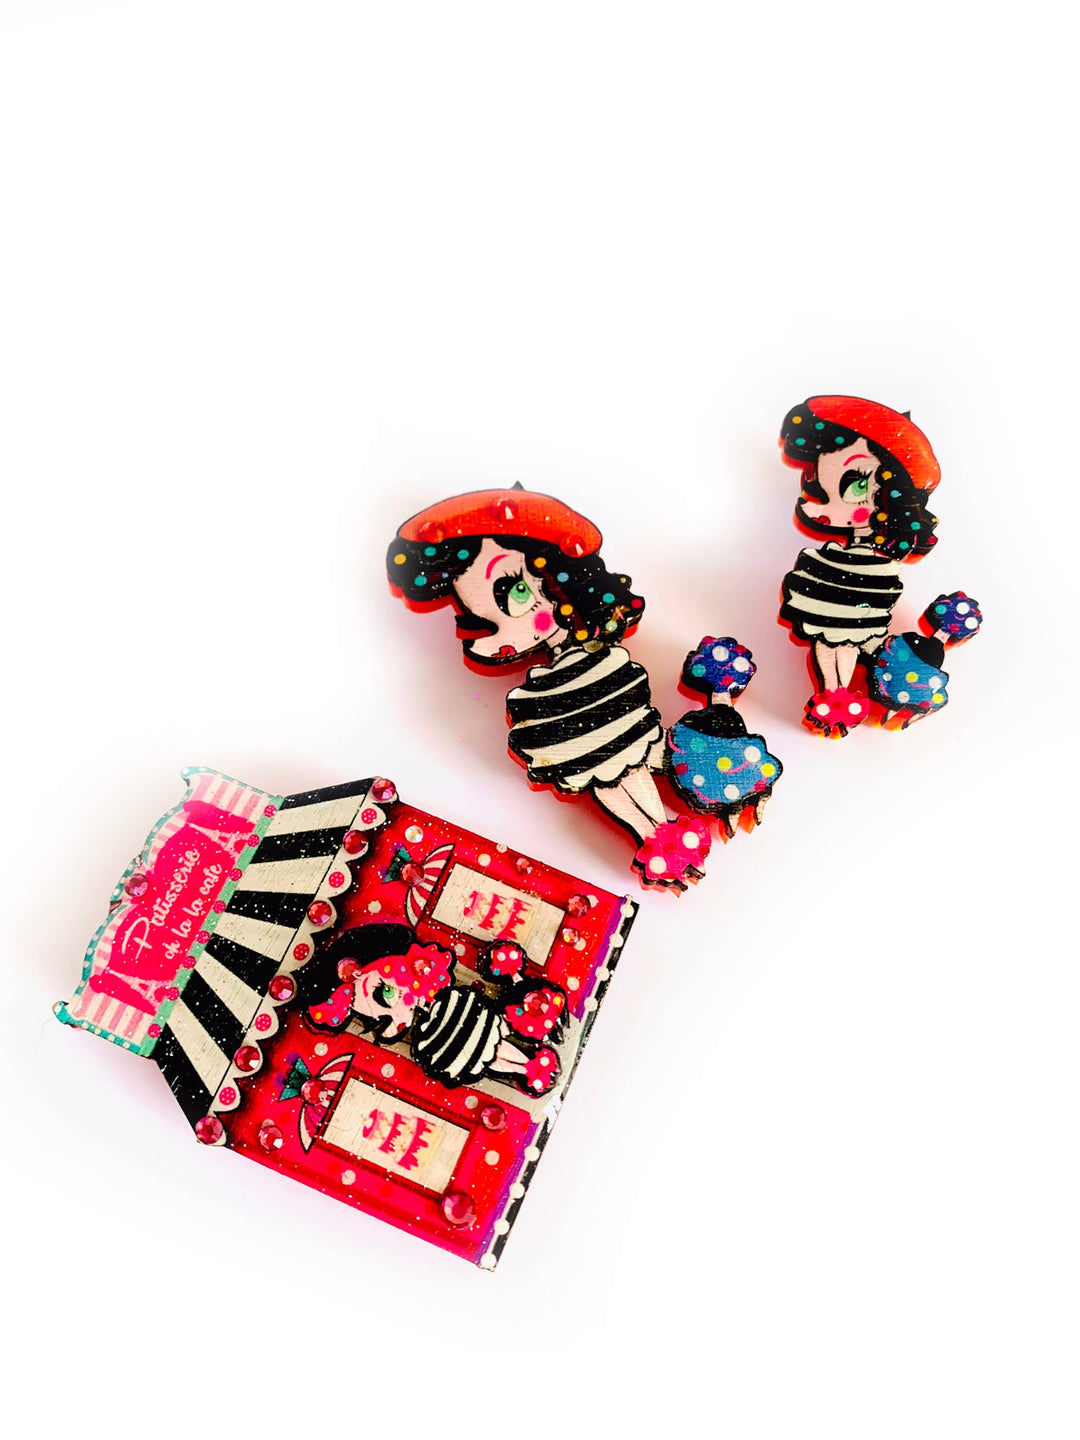 LuLu the Poodle Pattiserie Brooch by Rosie Rose Parker